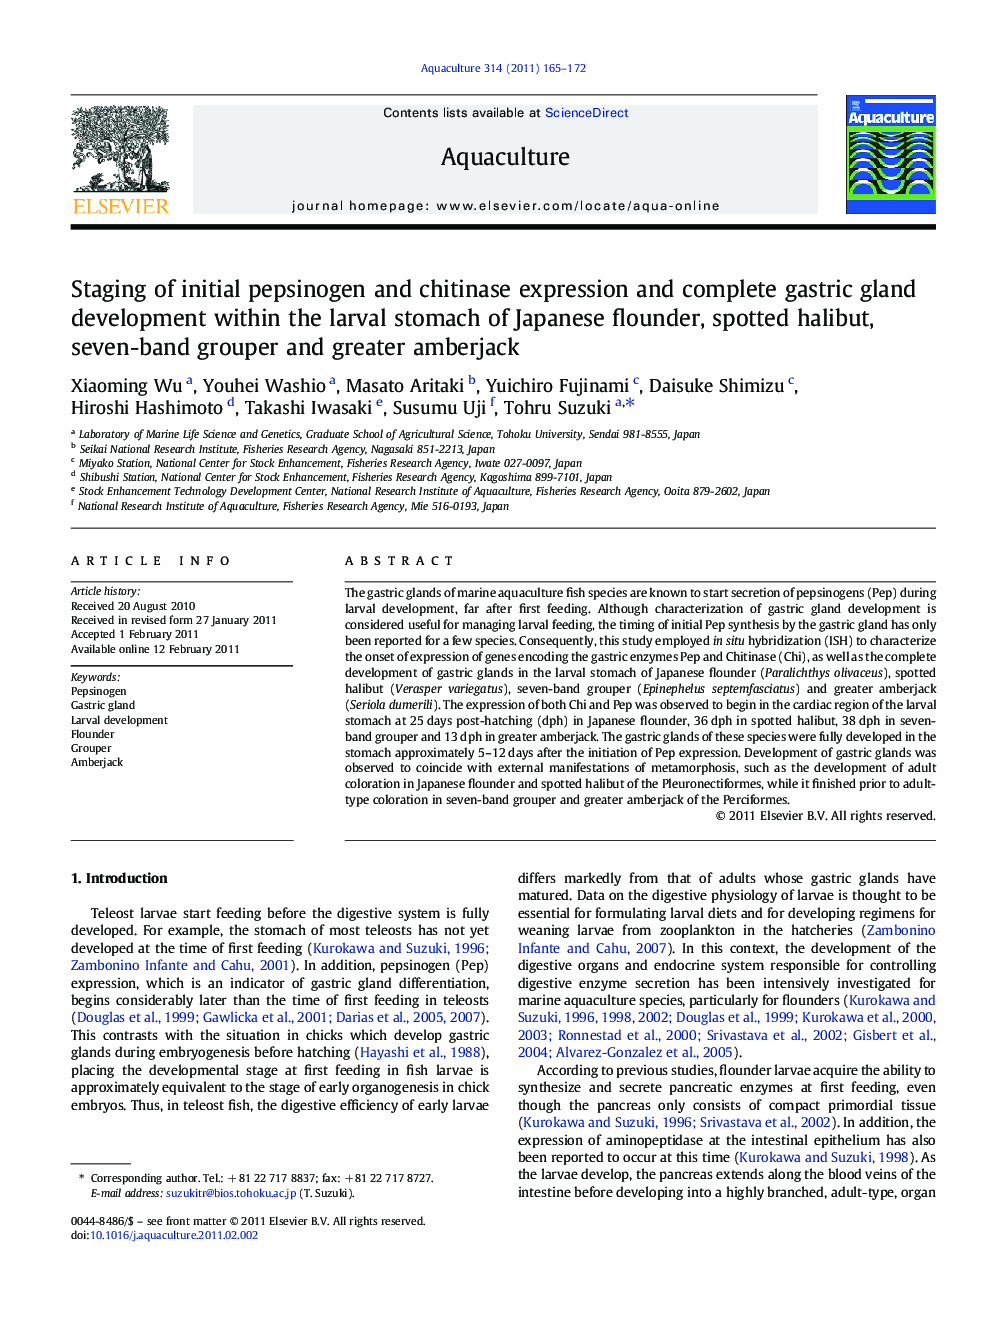 Staging of initial pepsinogen and chitinase expression and complete gastric gland development within the larval stomach of Japanese flounder, spotted halibut, seven-band grouper and greater amberjack